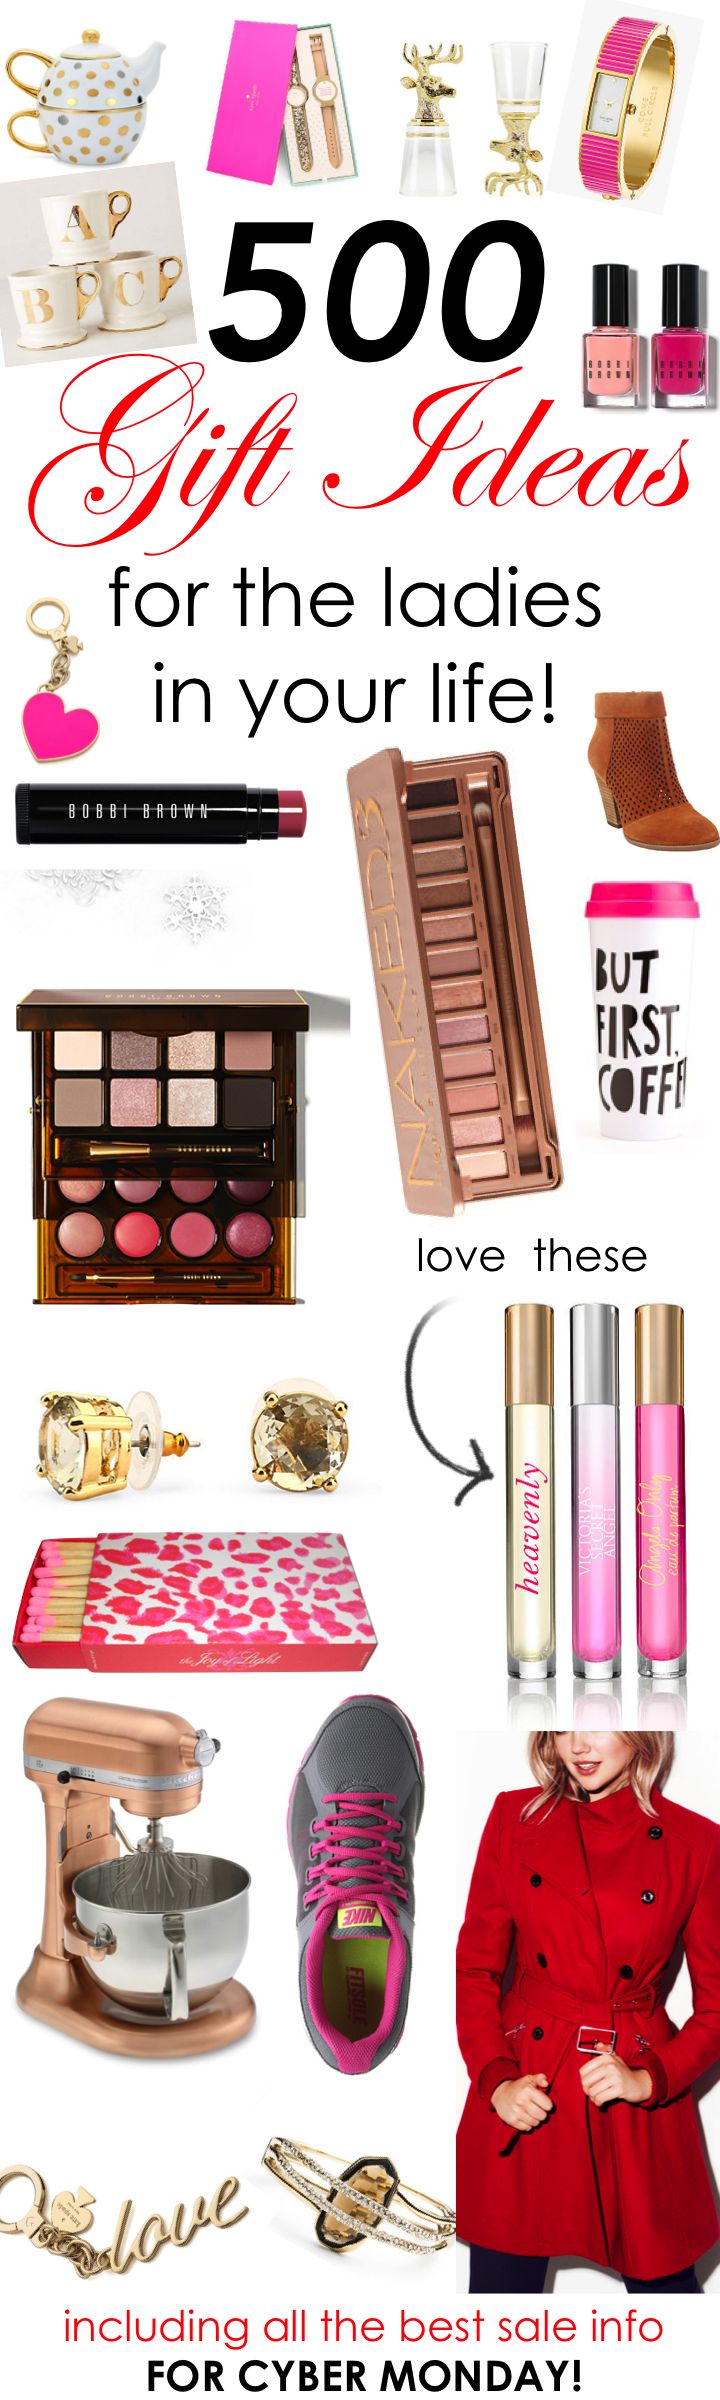 Over 500 Gift Ideas for the Ladies in Your Life! www.theperfectpal...